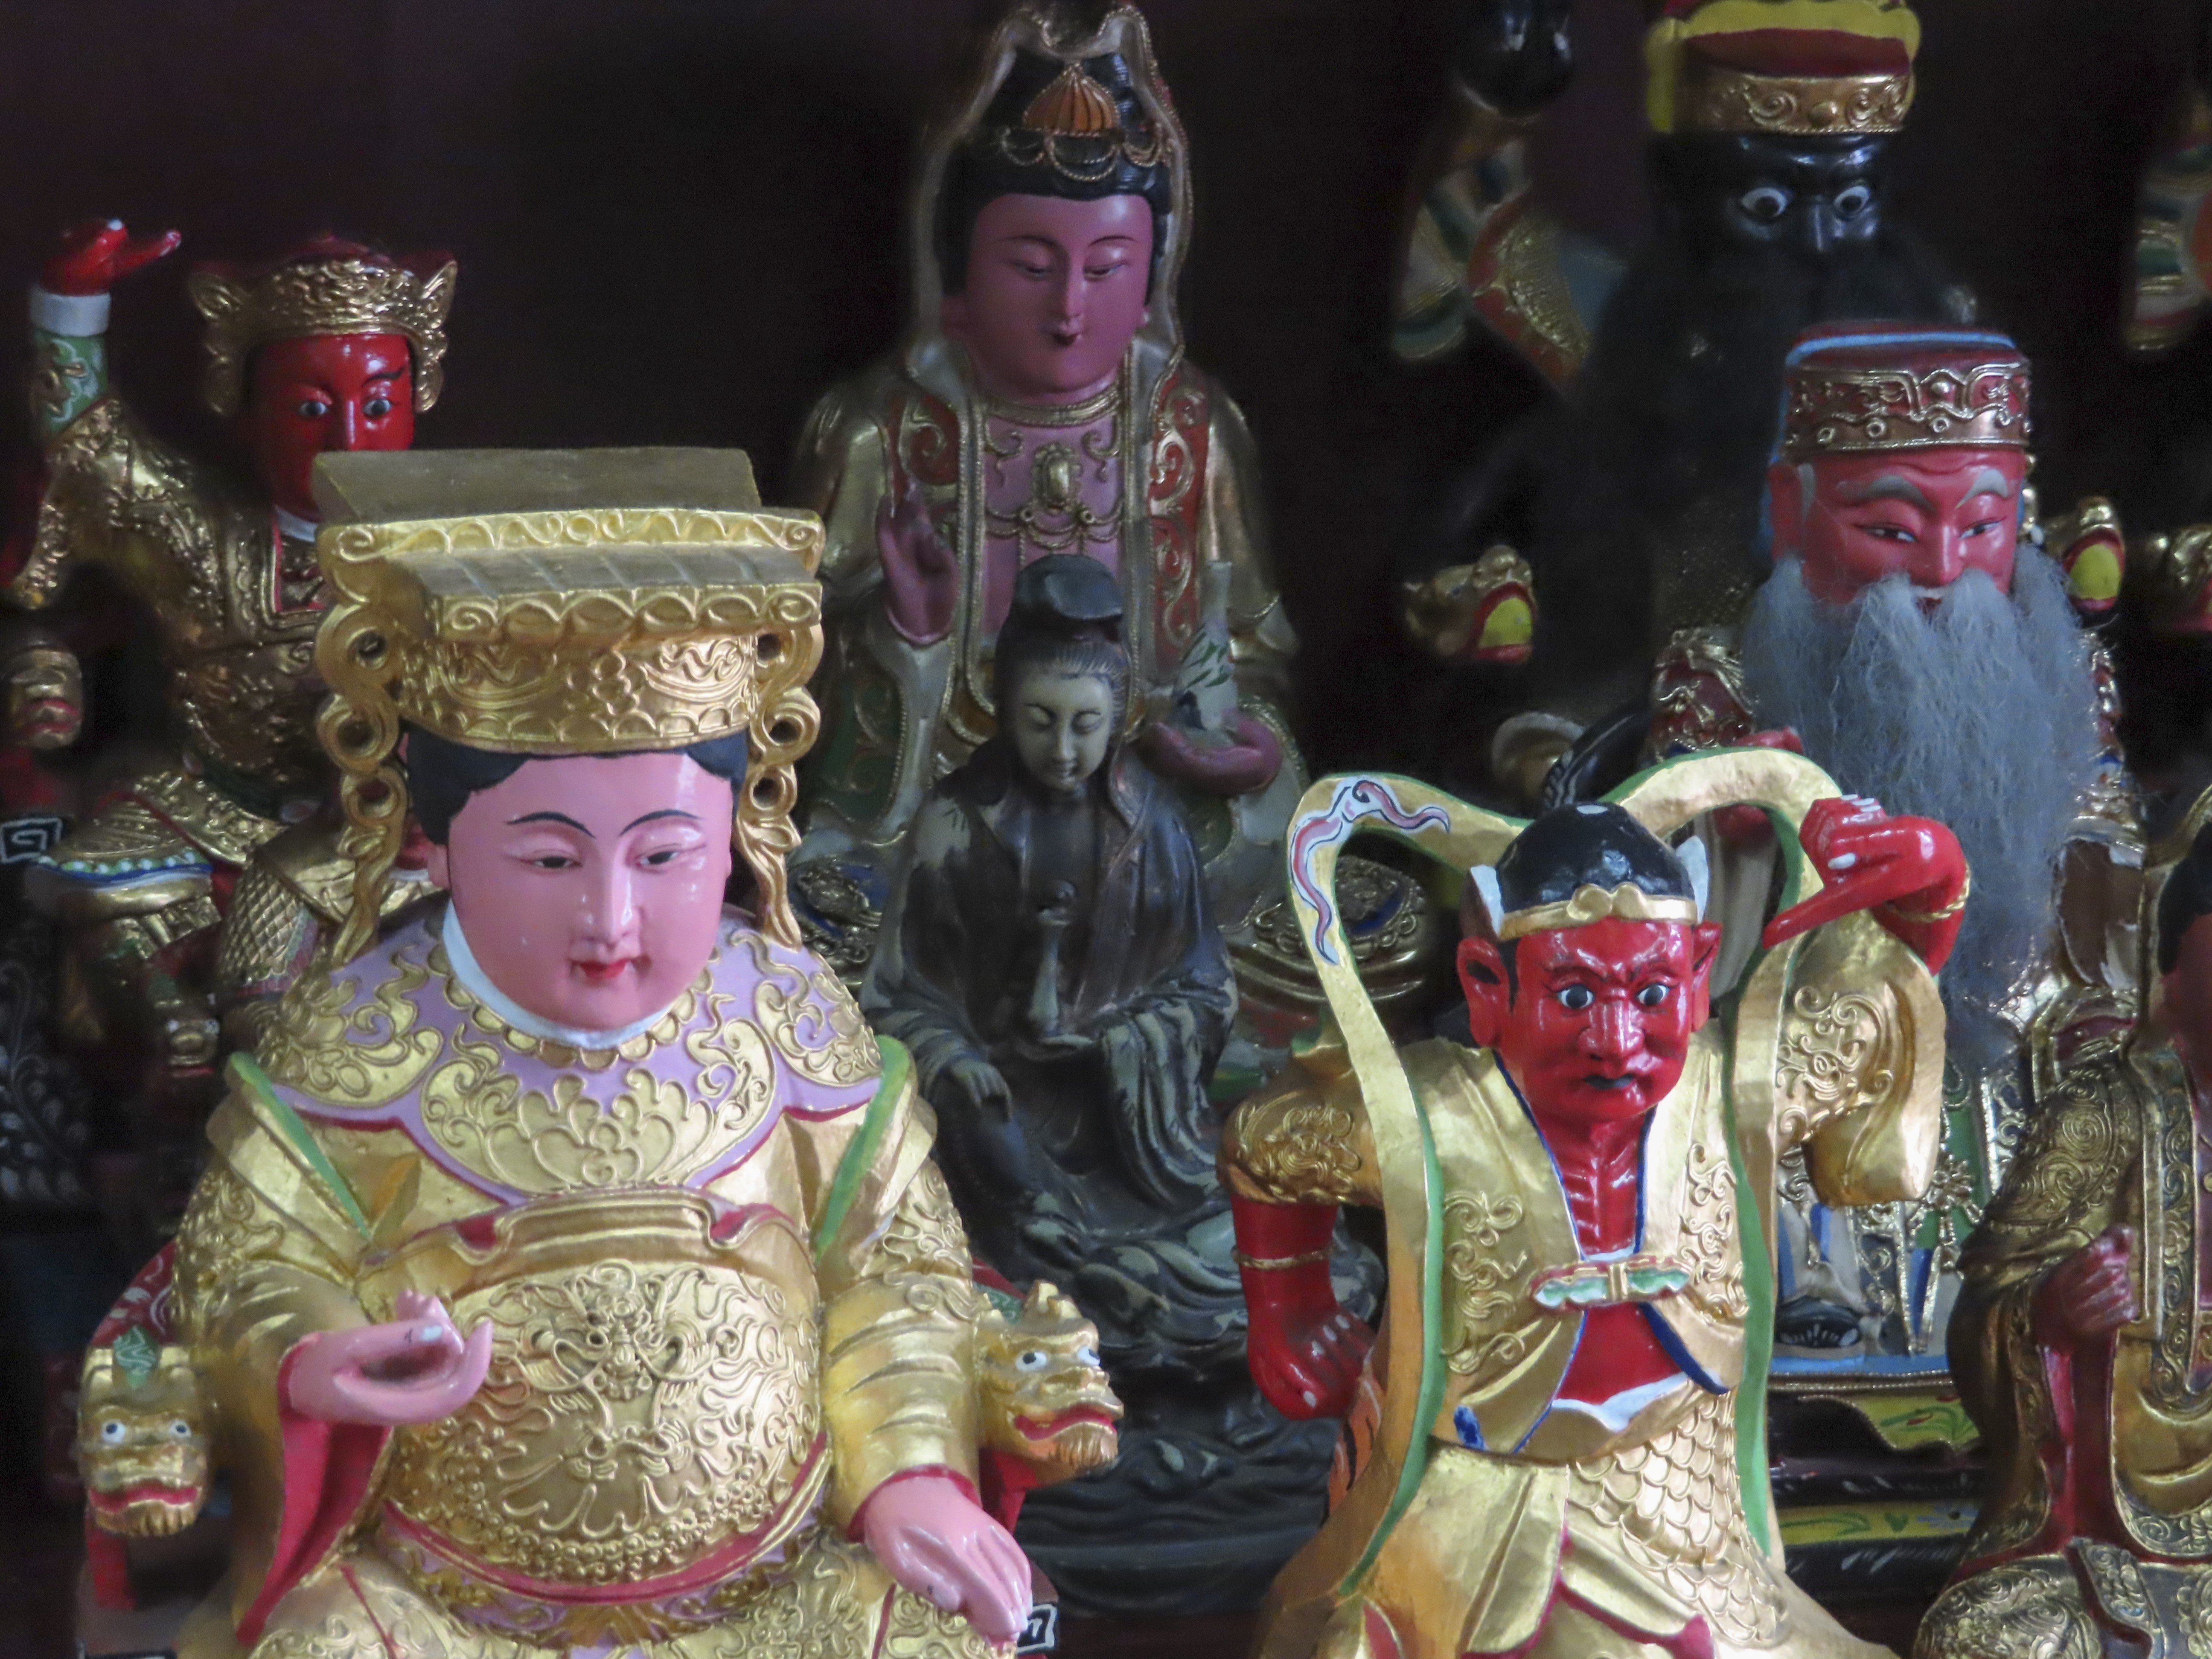 Statues of deities at Say Tian Hng, in Singapore. Photo: David Leffman